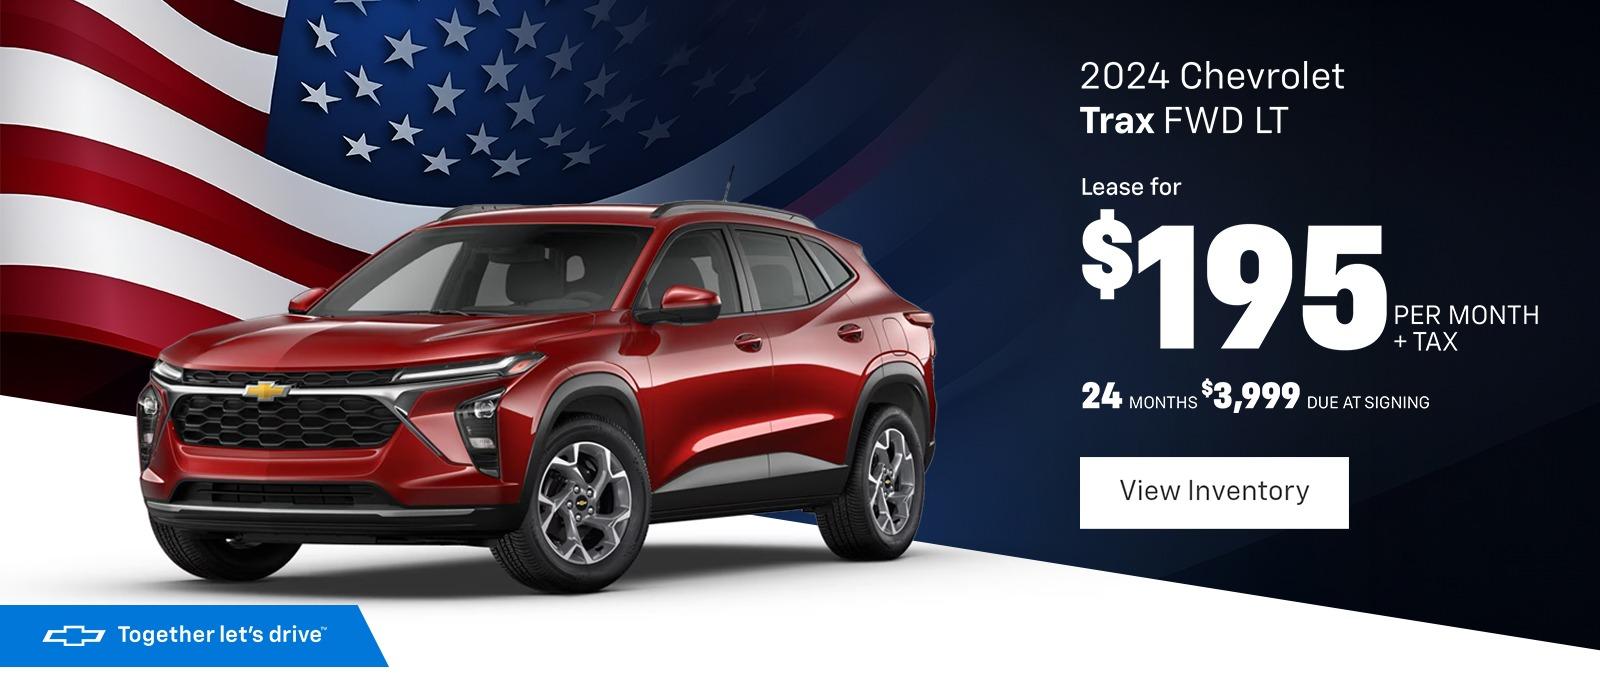 2024 Chevrolet Trax FWD LT
Lease for $195 Per Month + Tax 24 months $3,999 Due at signing